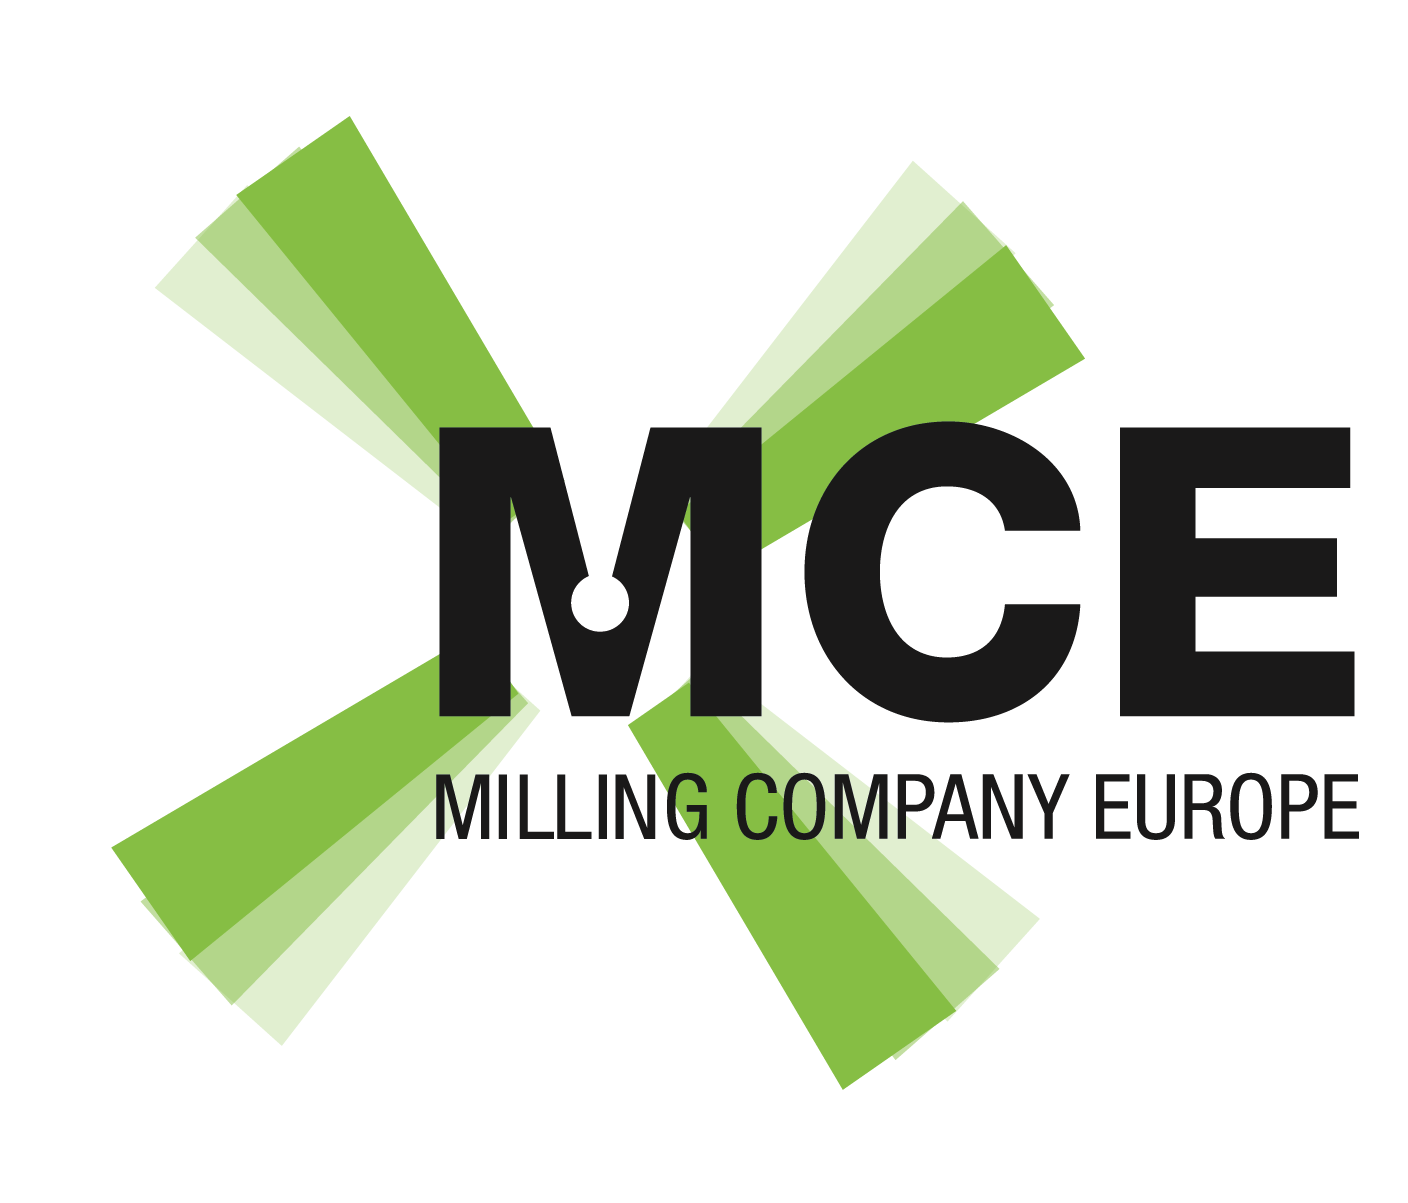 Milling Company Europe